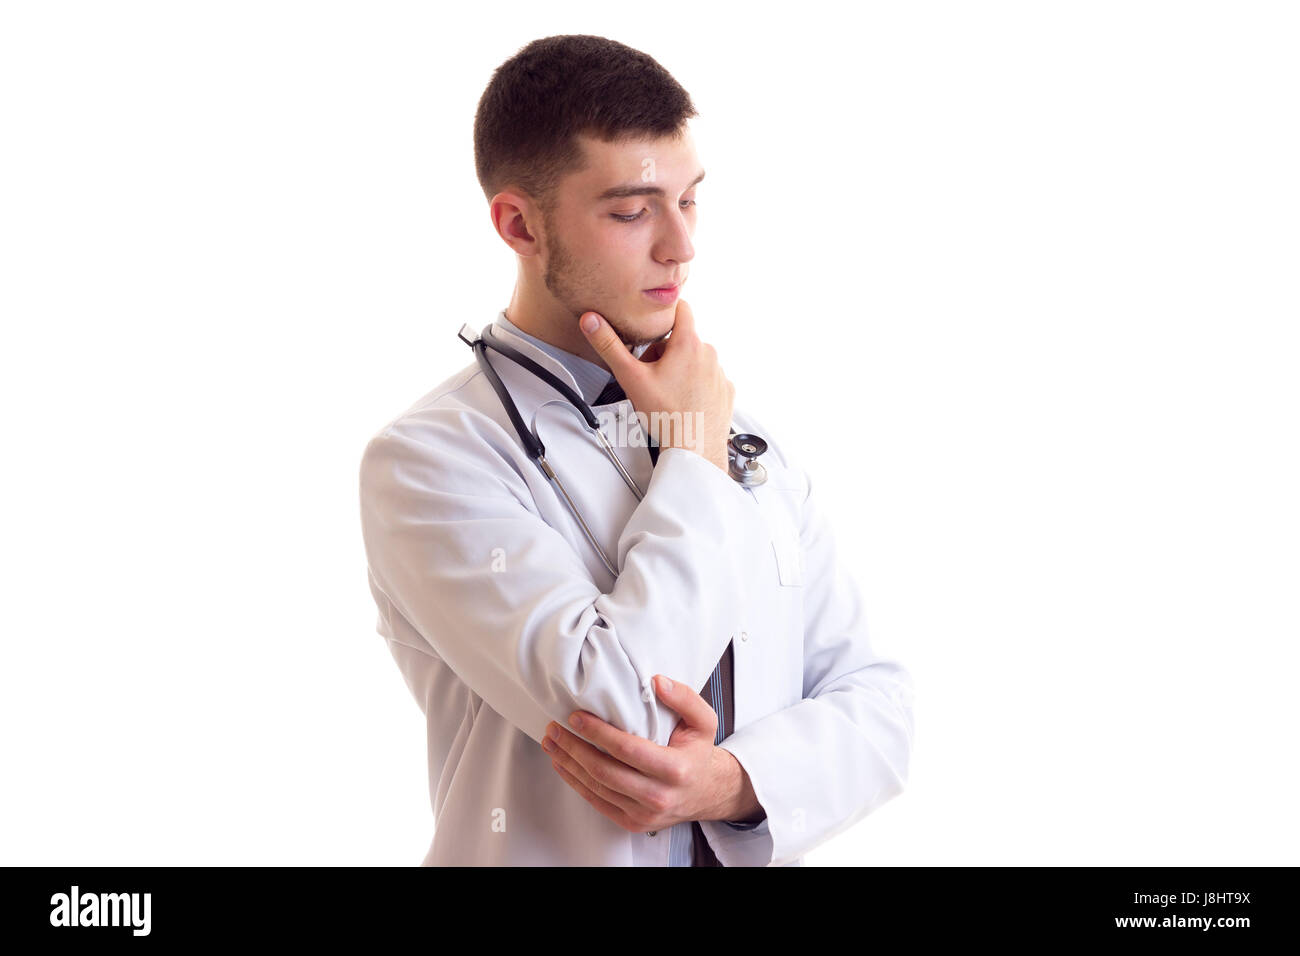 Young man in doctor gown Stock Photo